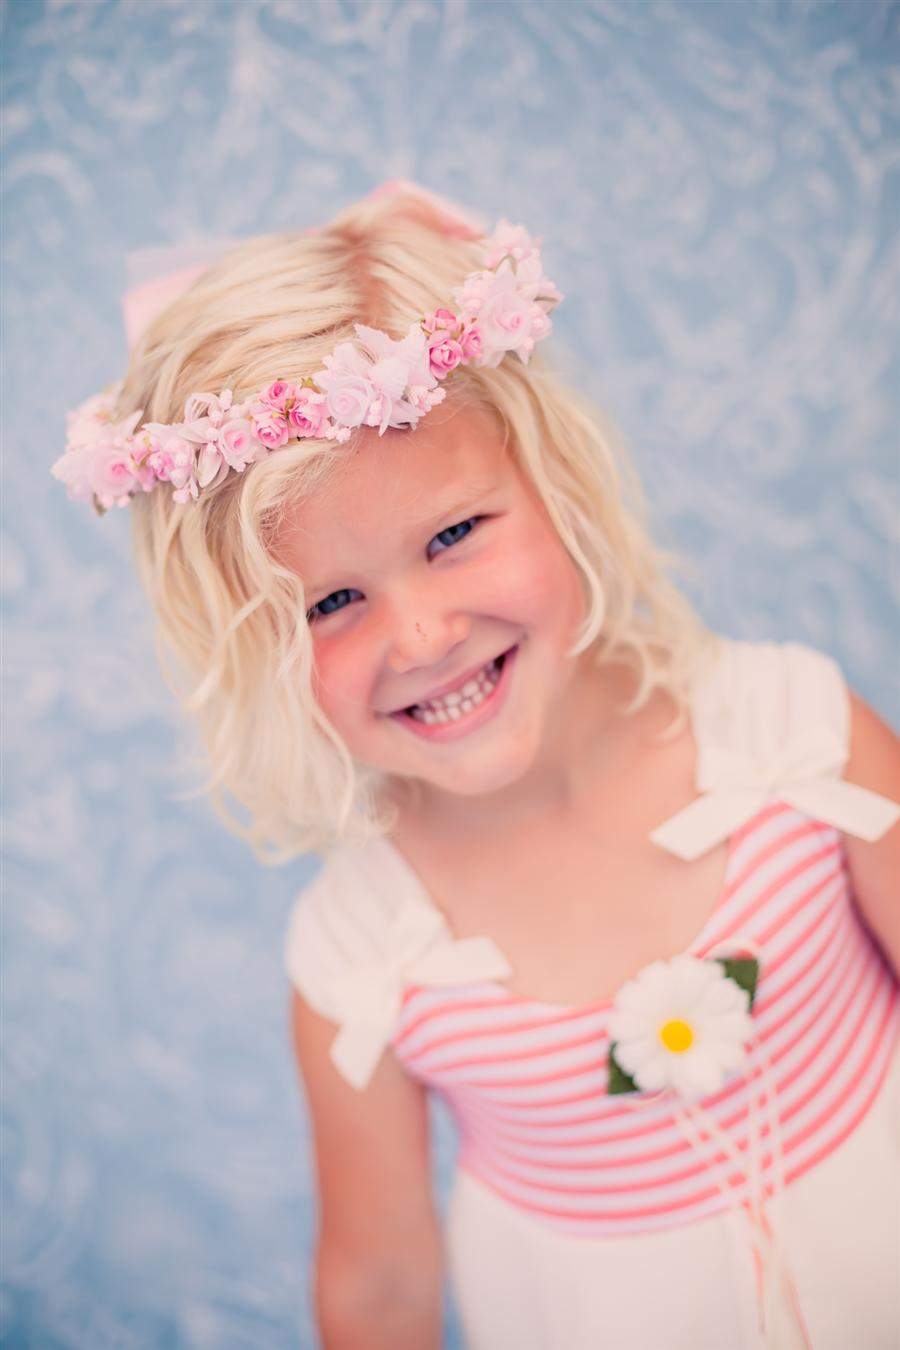 Floral Crown (Wreath)-Kid's Dream-1_2,3_4,5_6,7_8,big_girl,color_White,fabric_Satin,little_girl,size_02,size_04,size_06,size_08,size_10,size_12,size_14